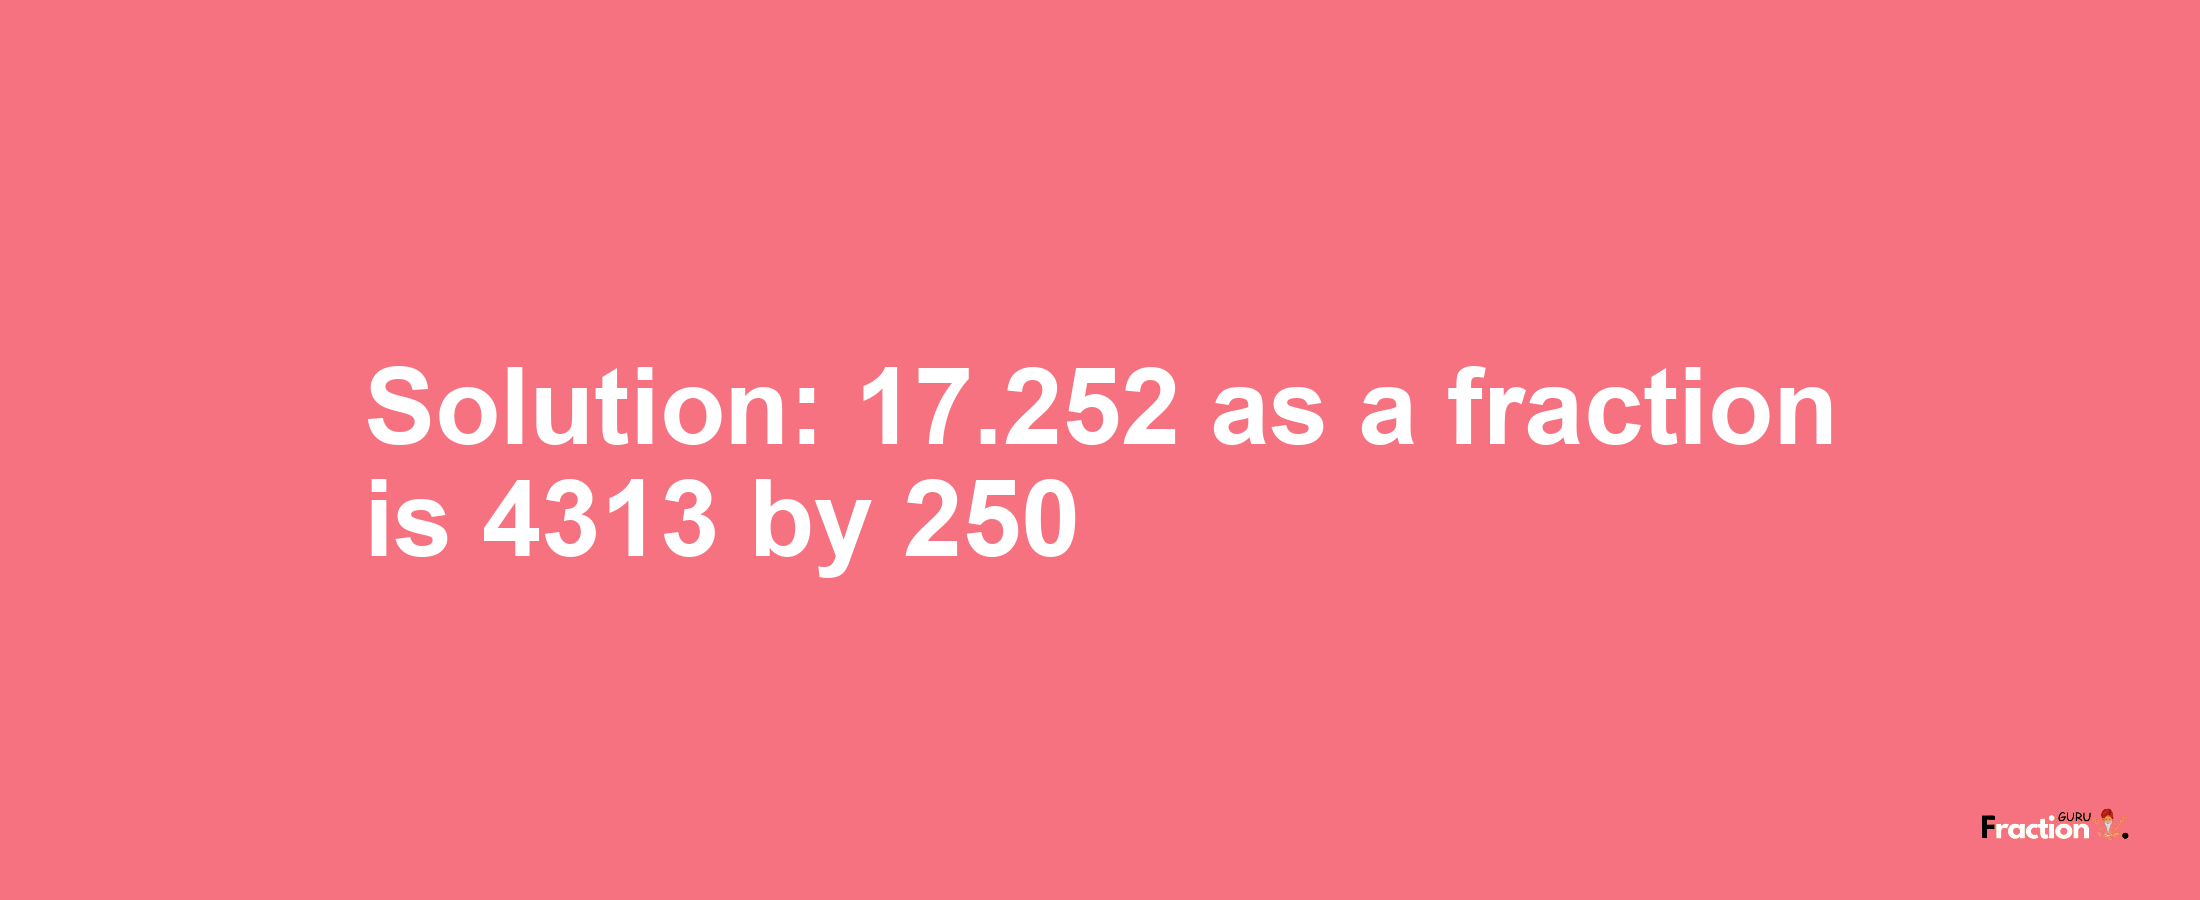 Solution:17.252 as a fraction is 4313/250